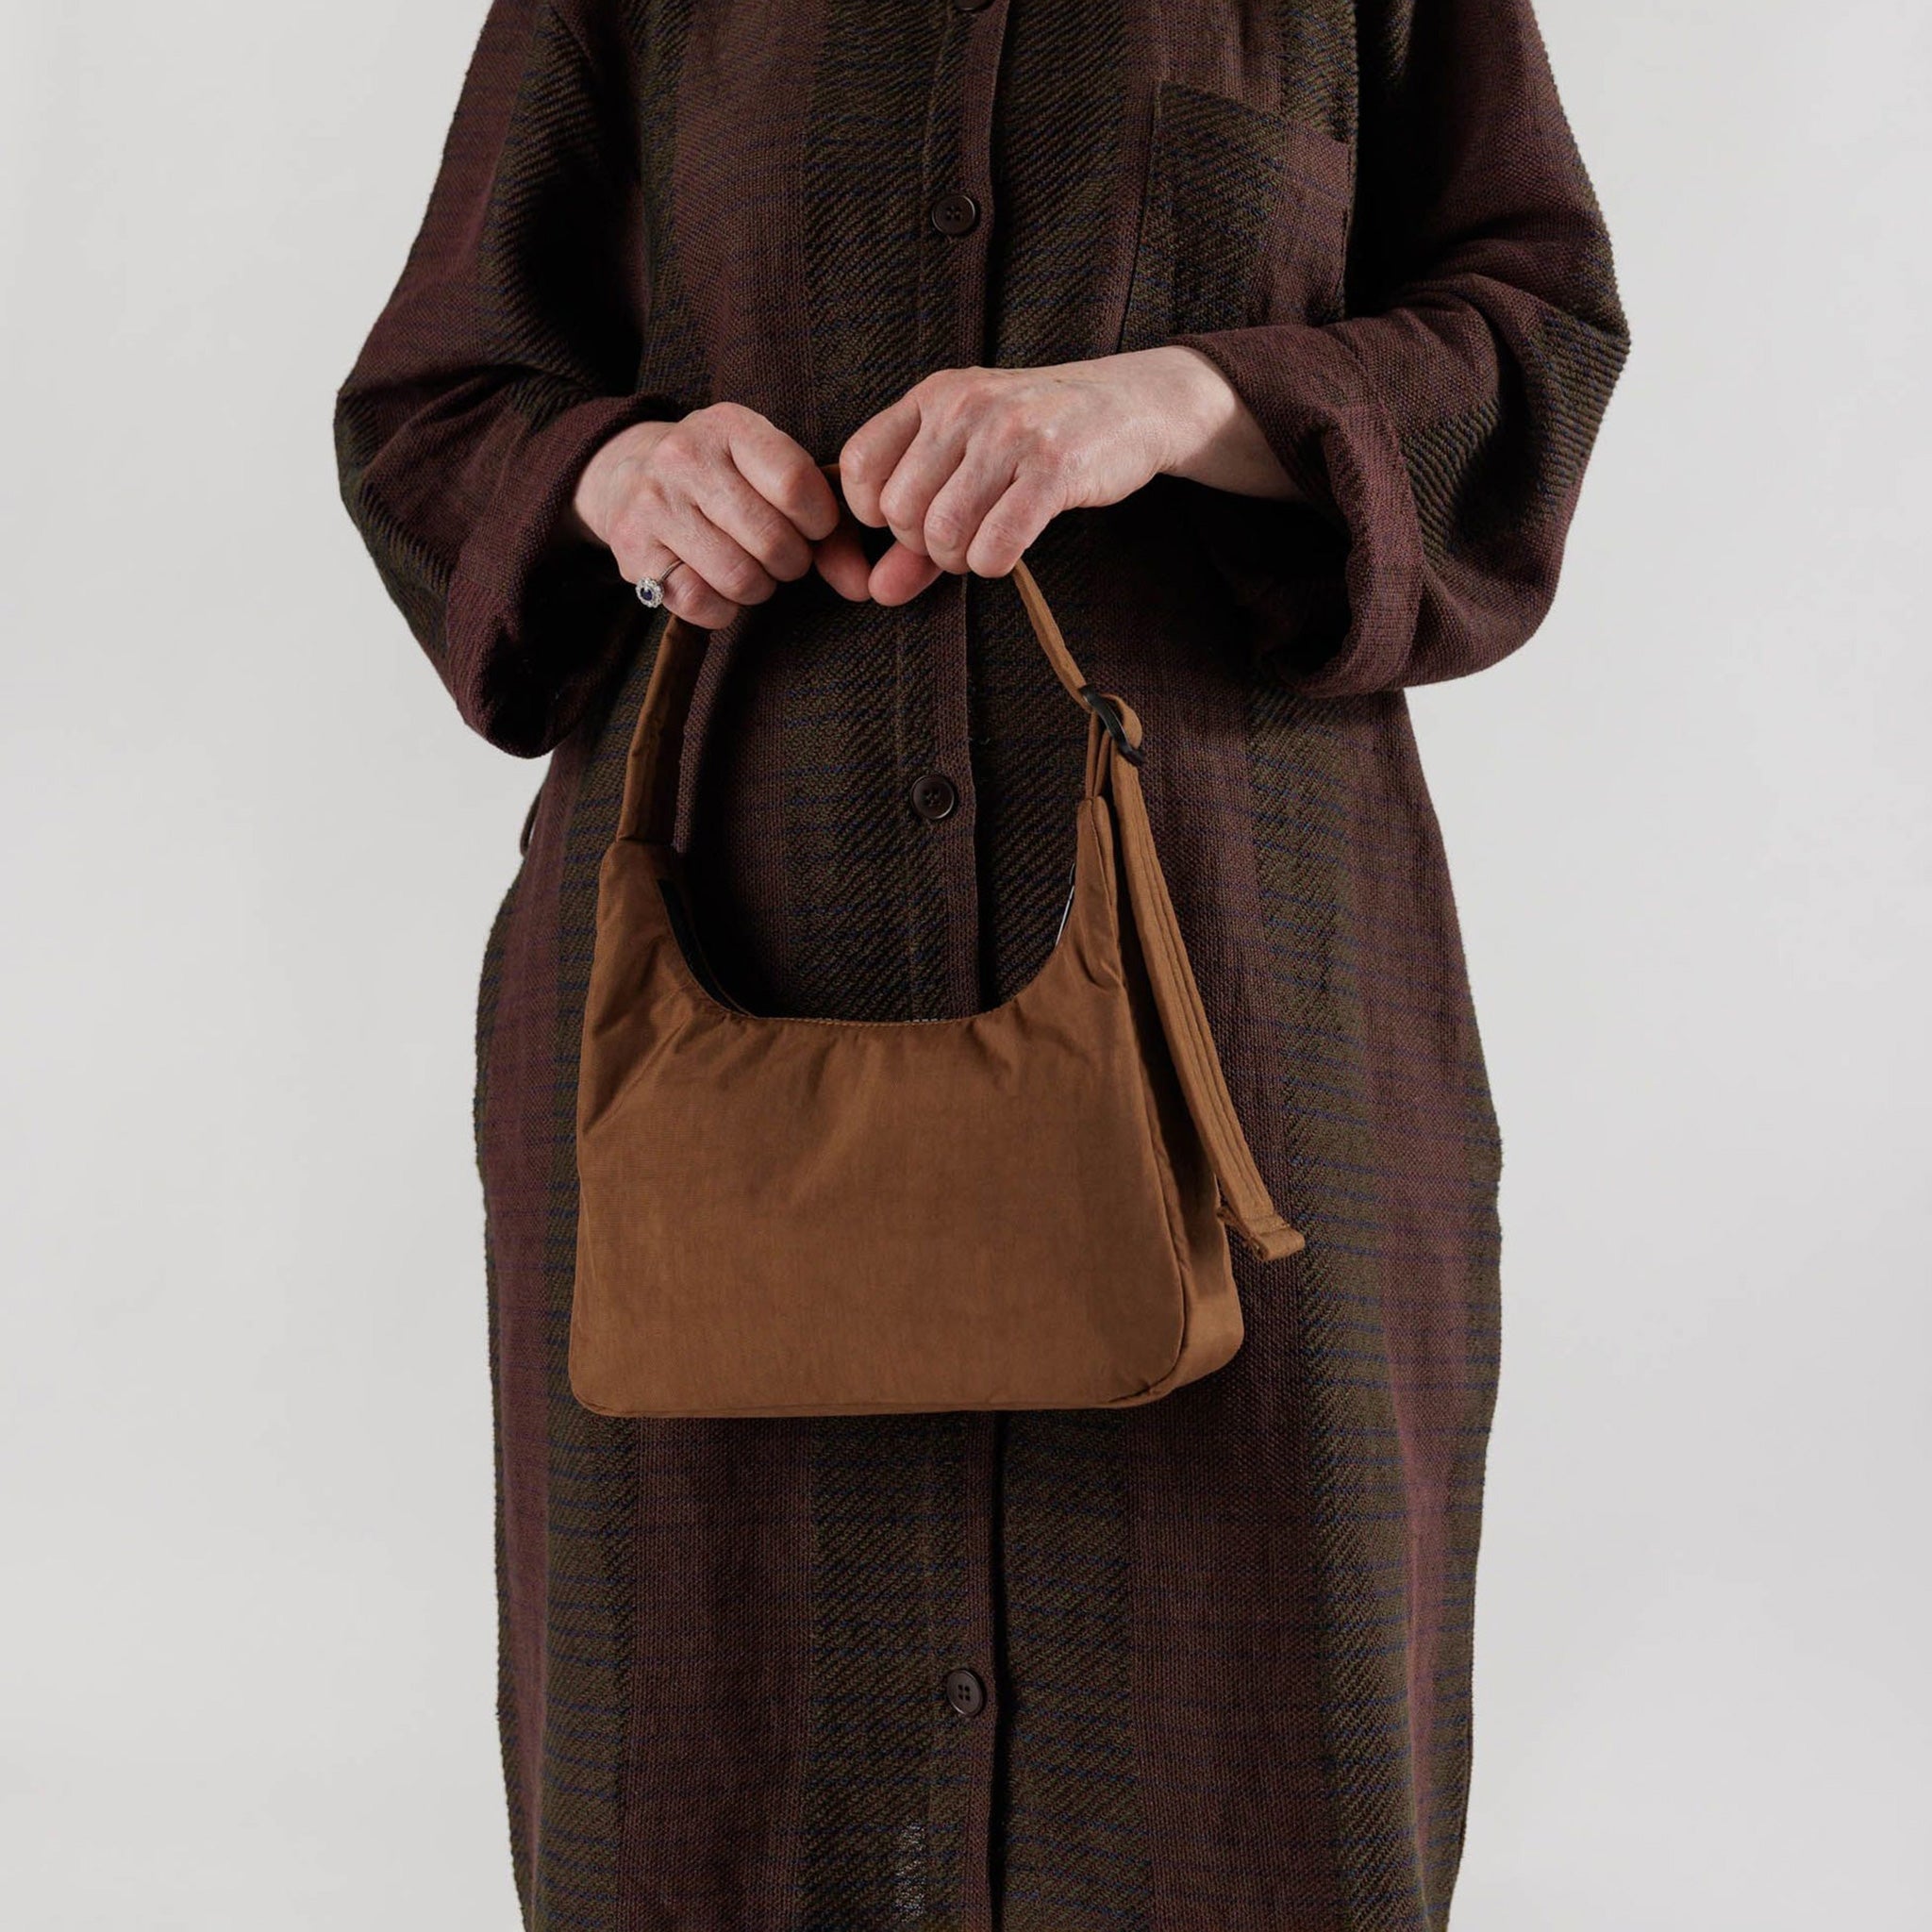 A brown nylon shoulder bag with a rectangular shape and top zipper, shown in the hands of a model.